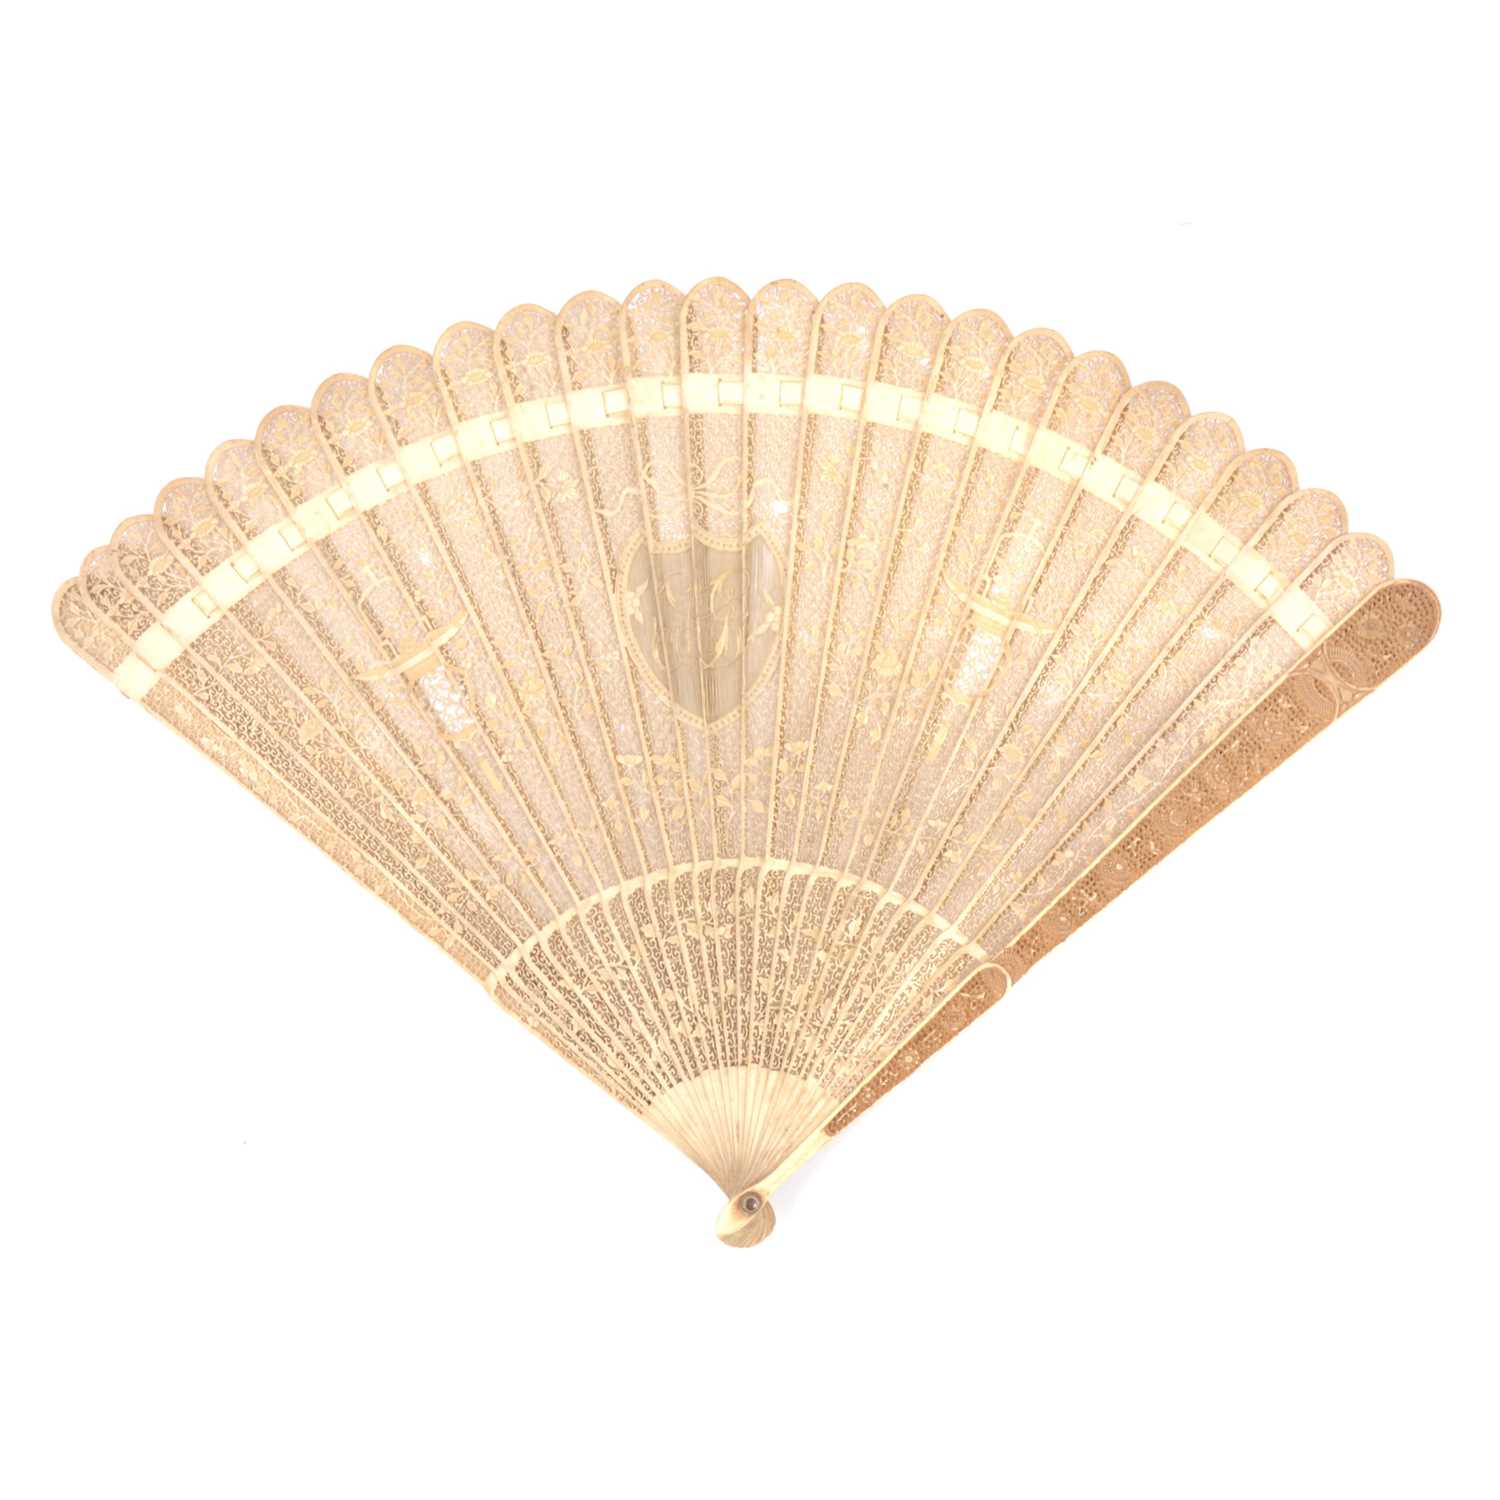 Lot 101 - China Trade carved ivory fan